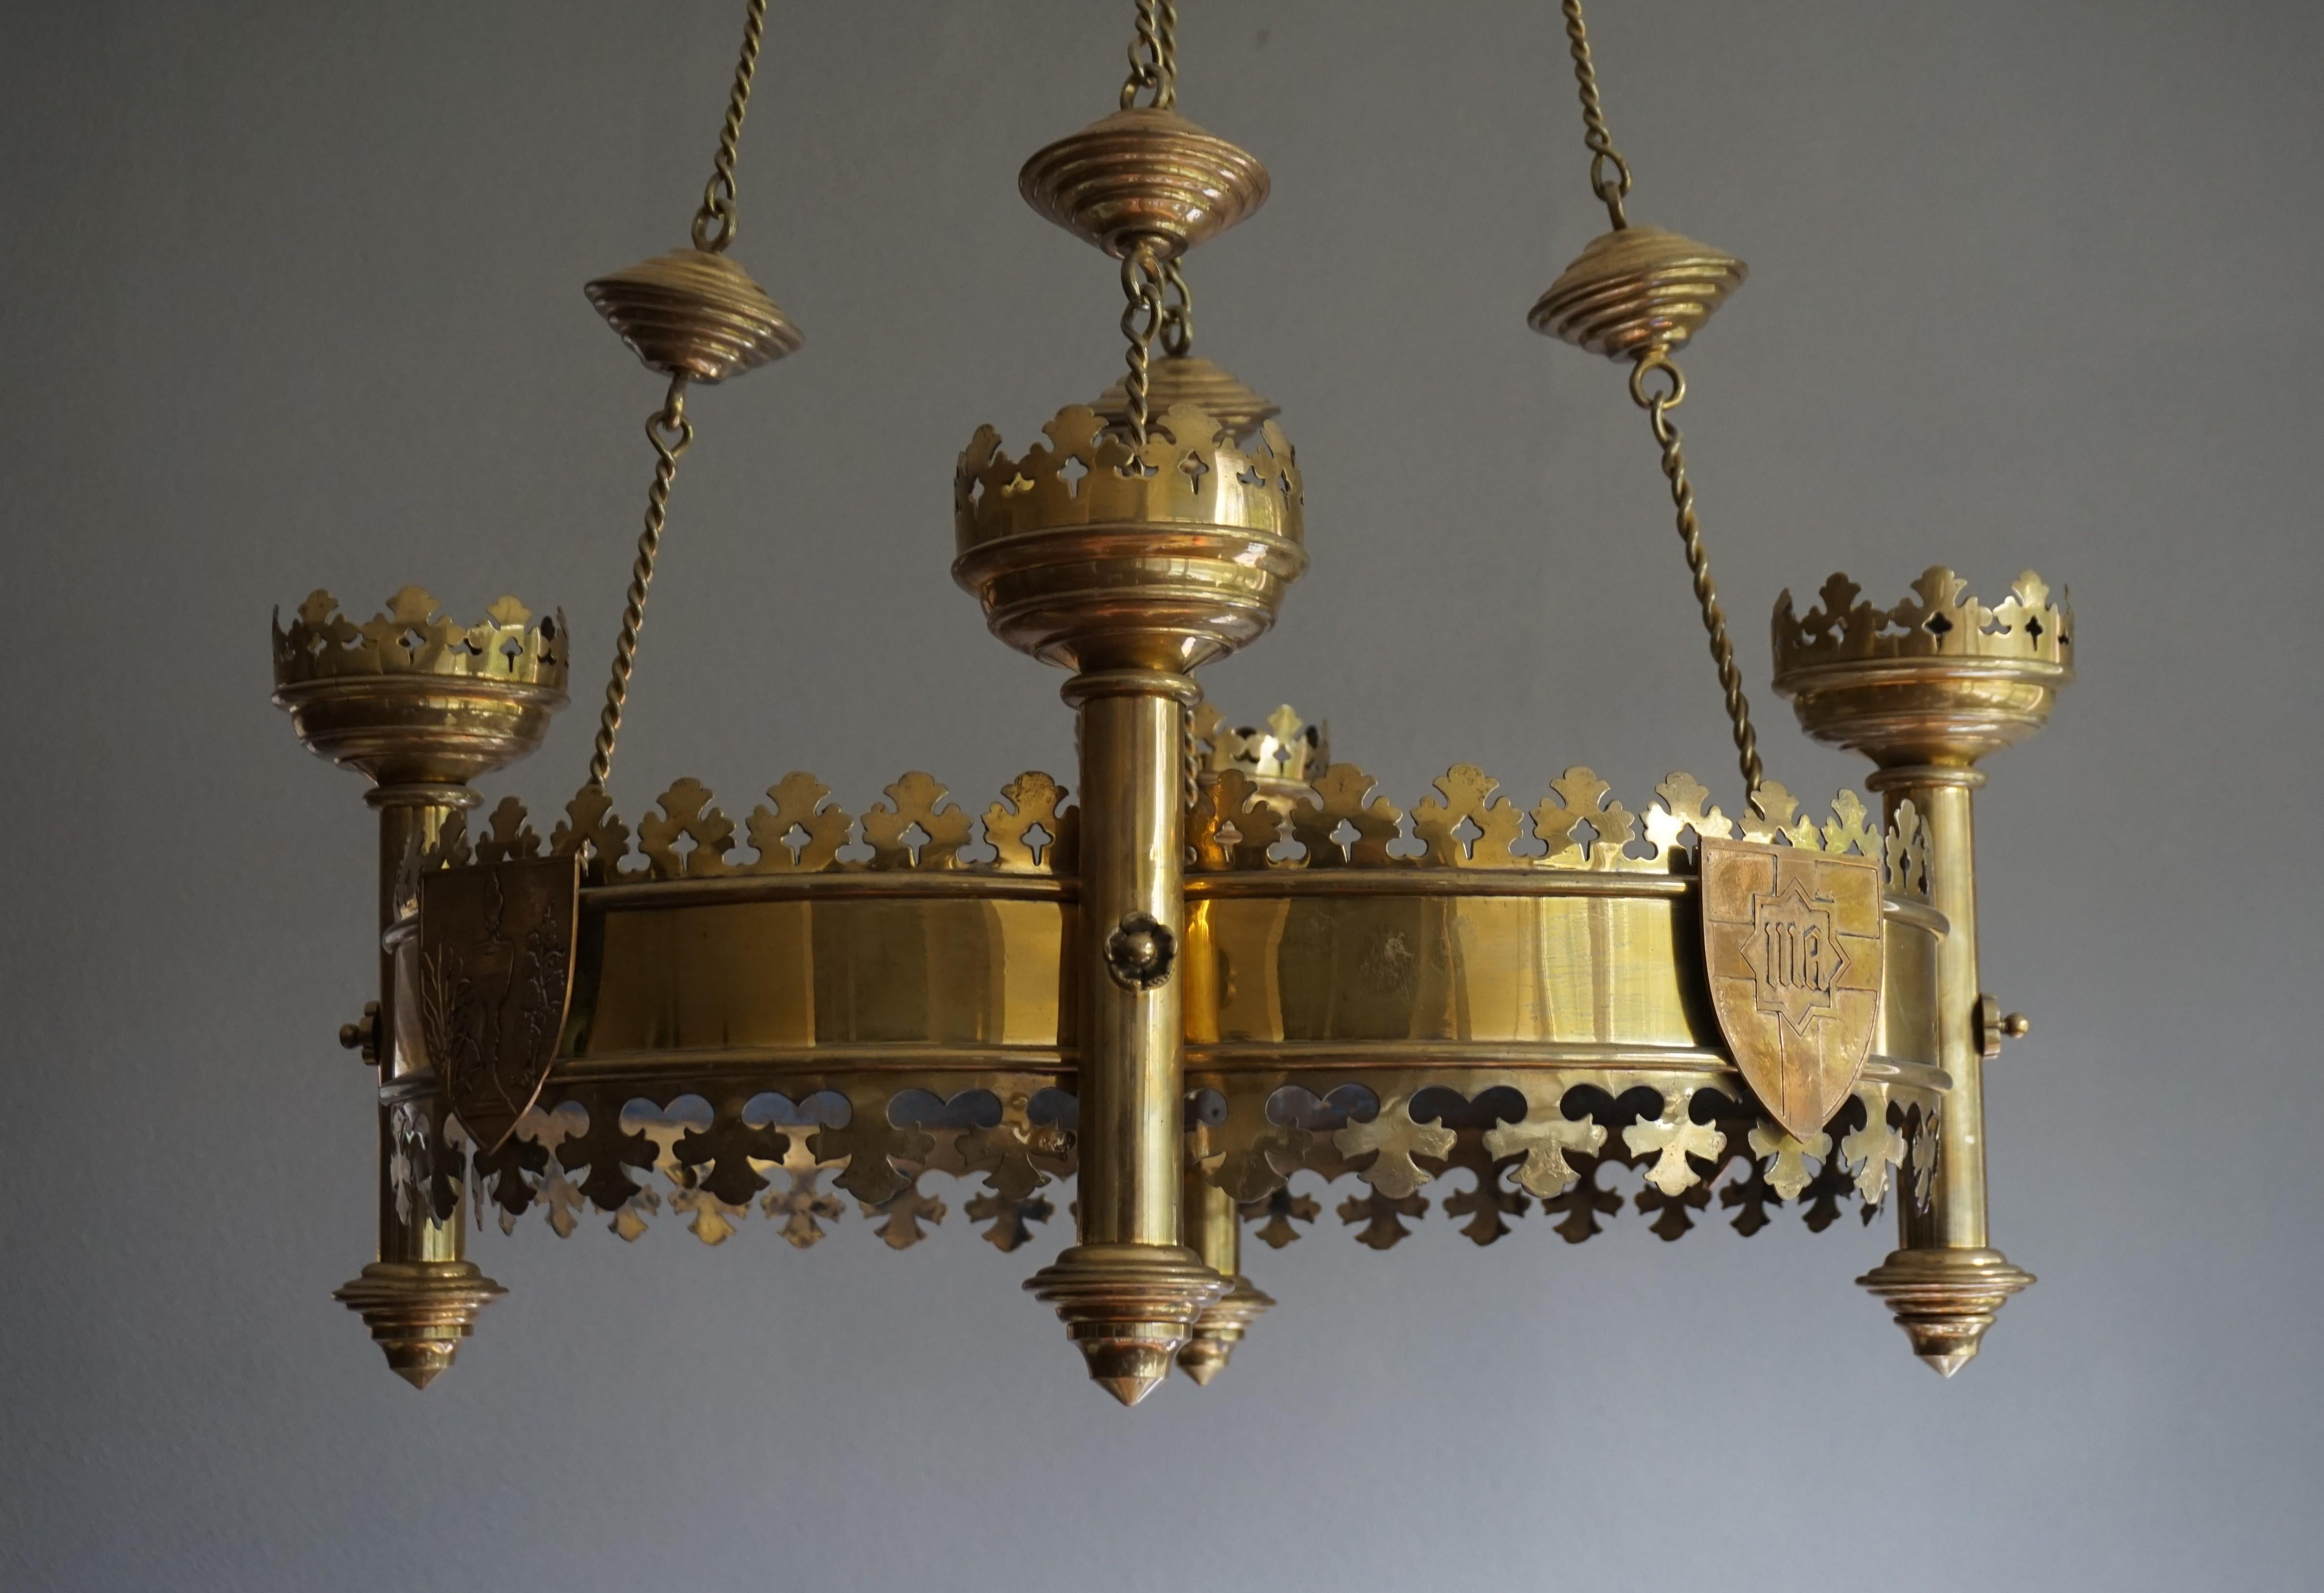 19th Century Rare and Striking Bronze & Brass Gothic Revival Advent Wreath Candle Chandelier